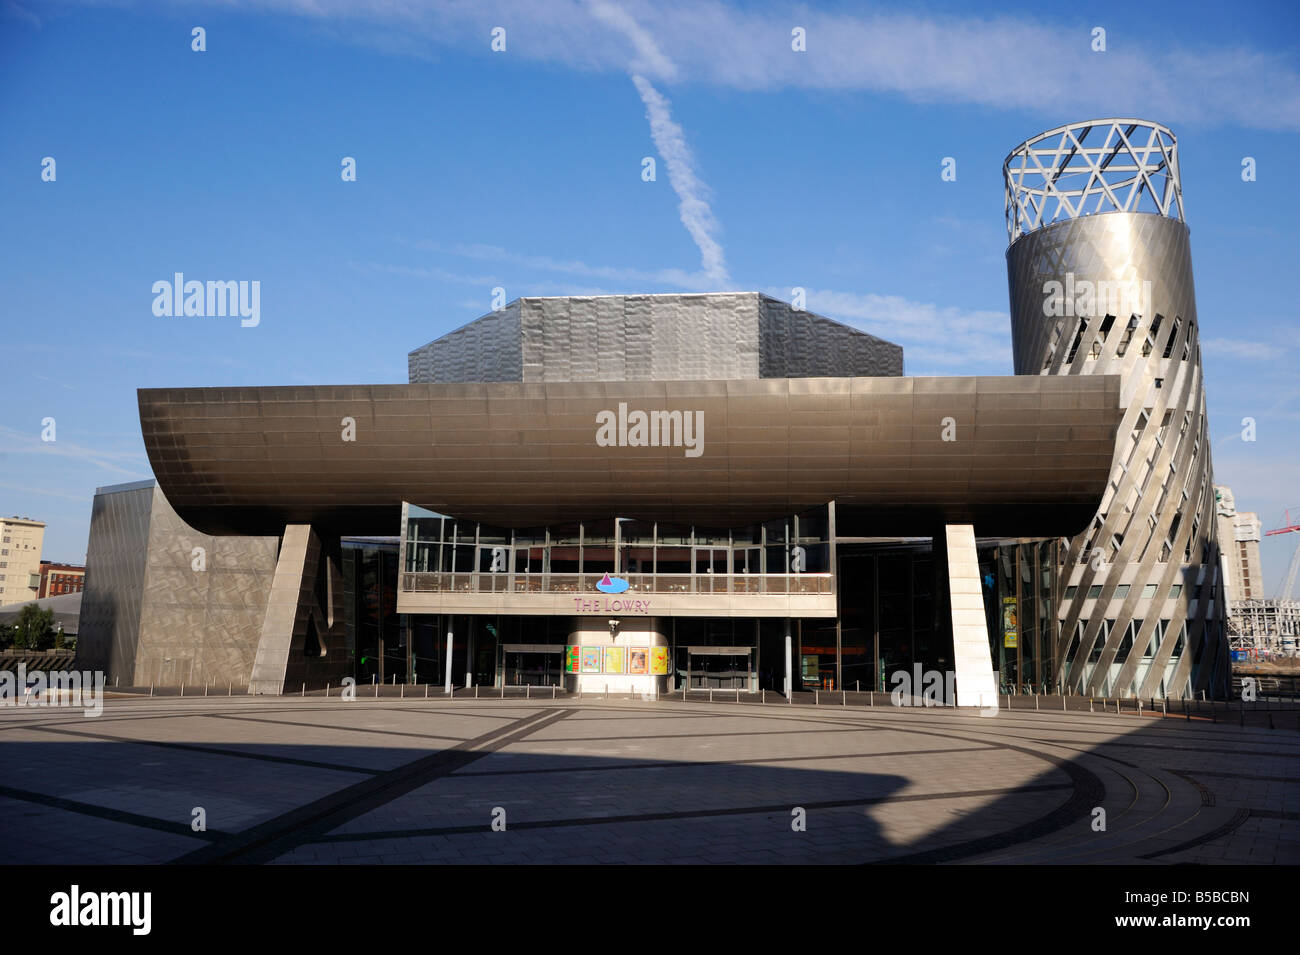 The Lowry Centre, Salford Quays, Greater Manchester, England, Europe Stock Photo